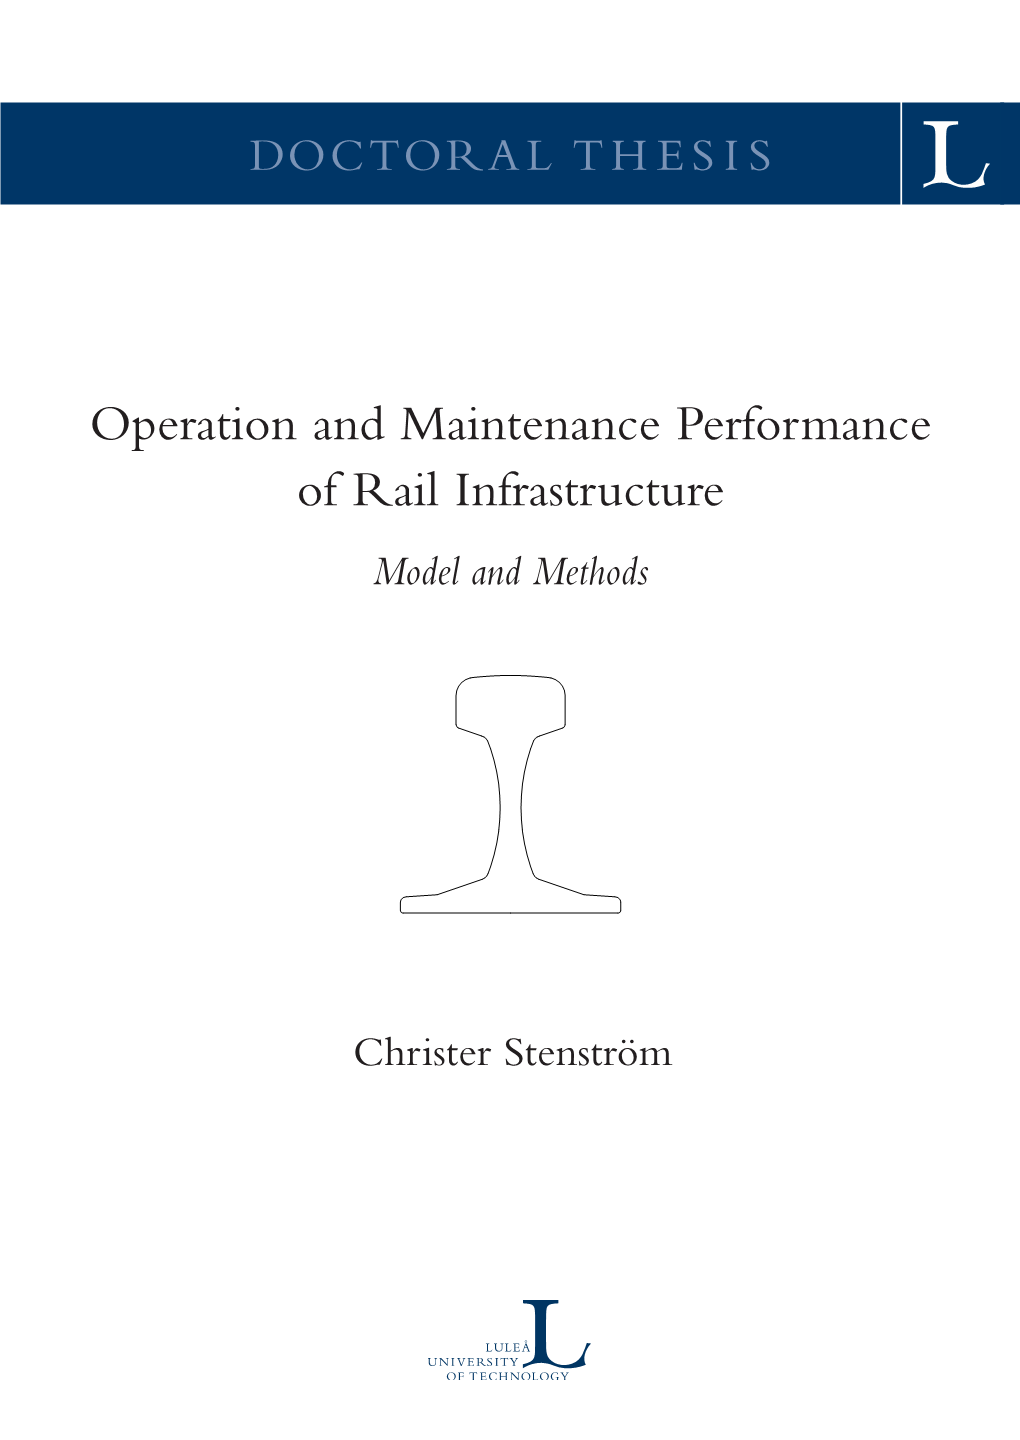 Operation and Maintenance Performance of Rail Infrastructure